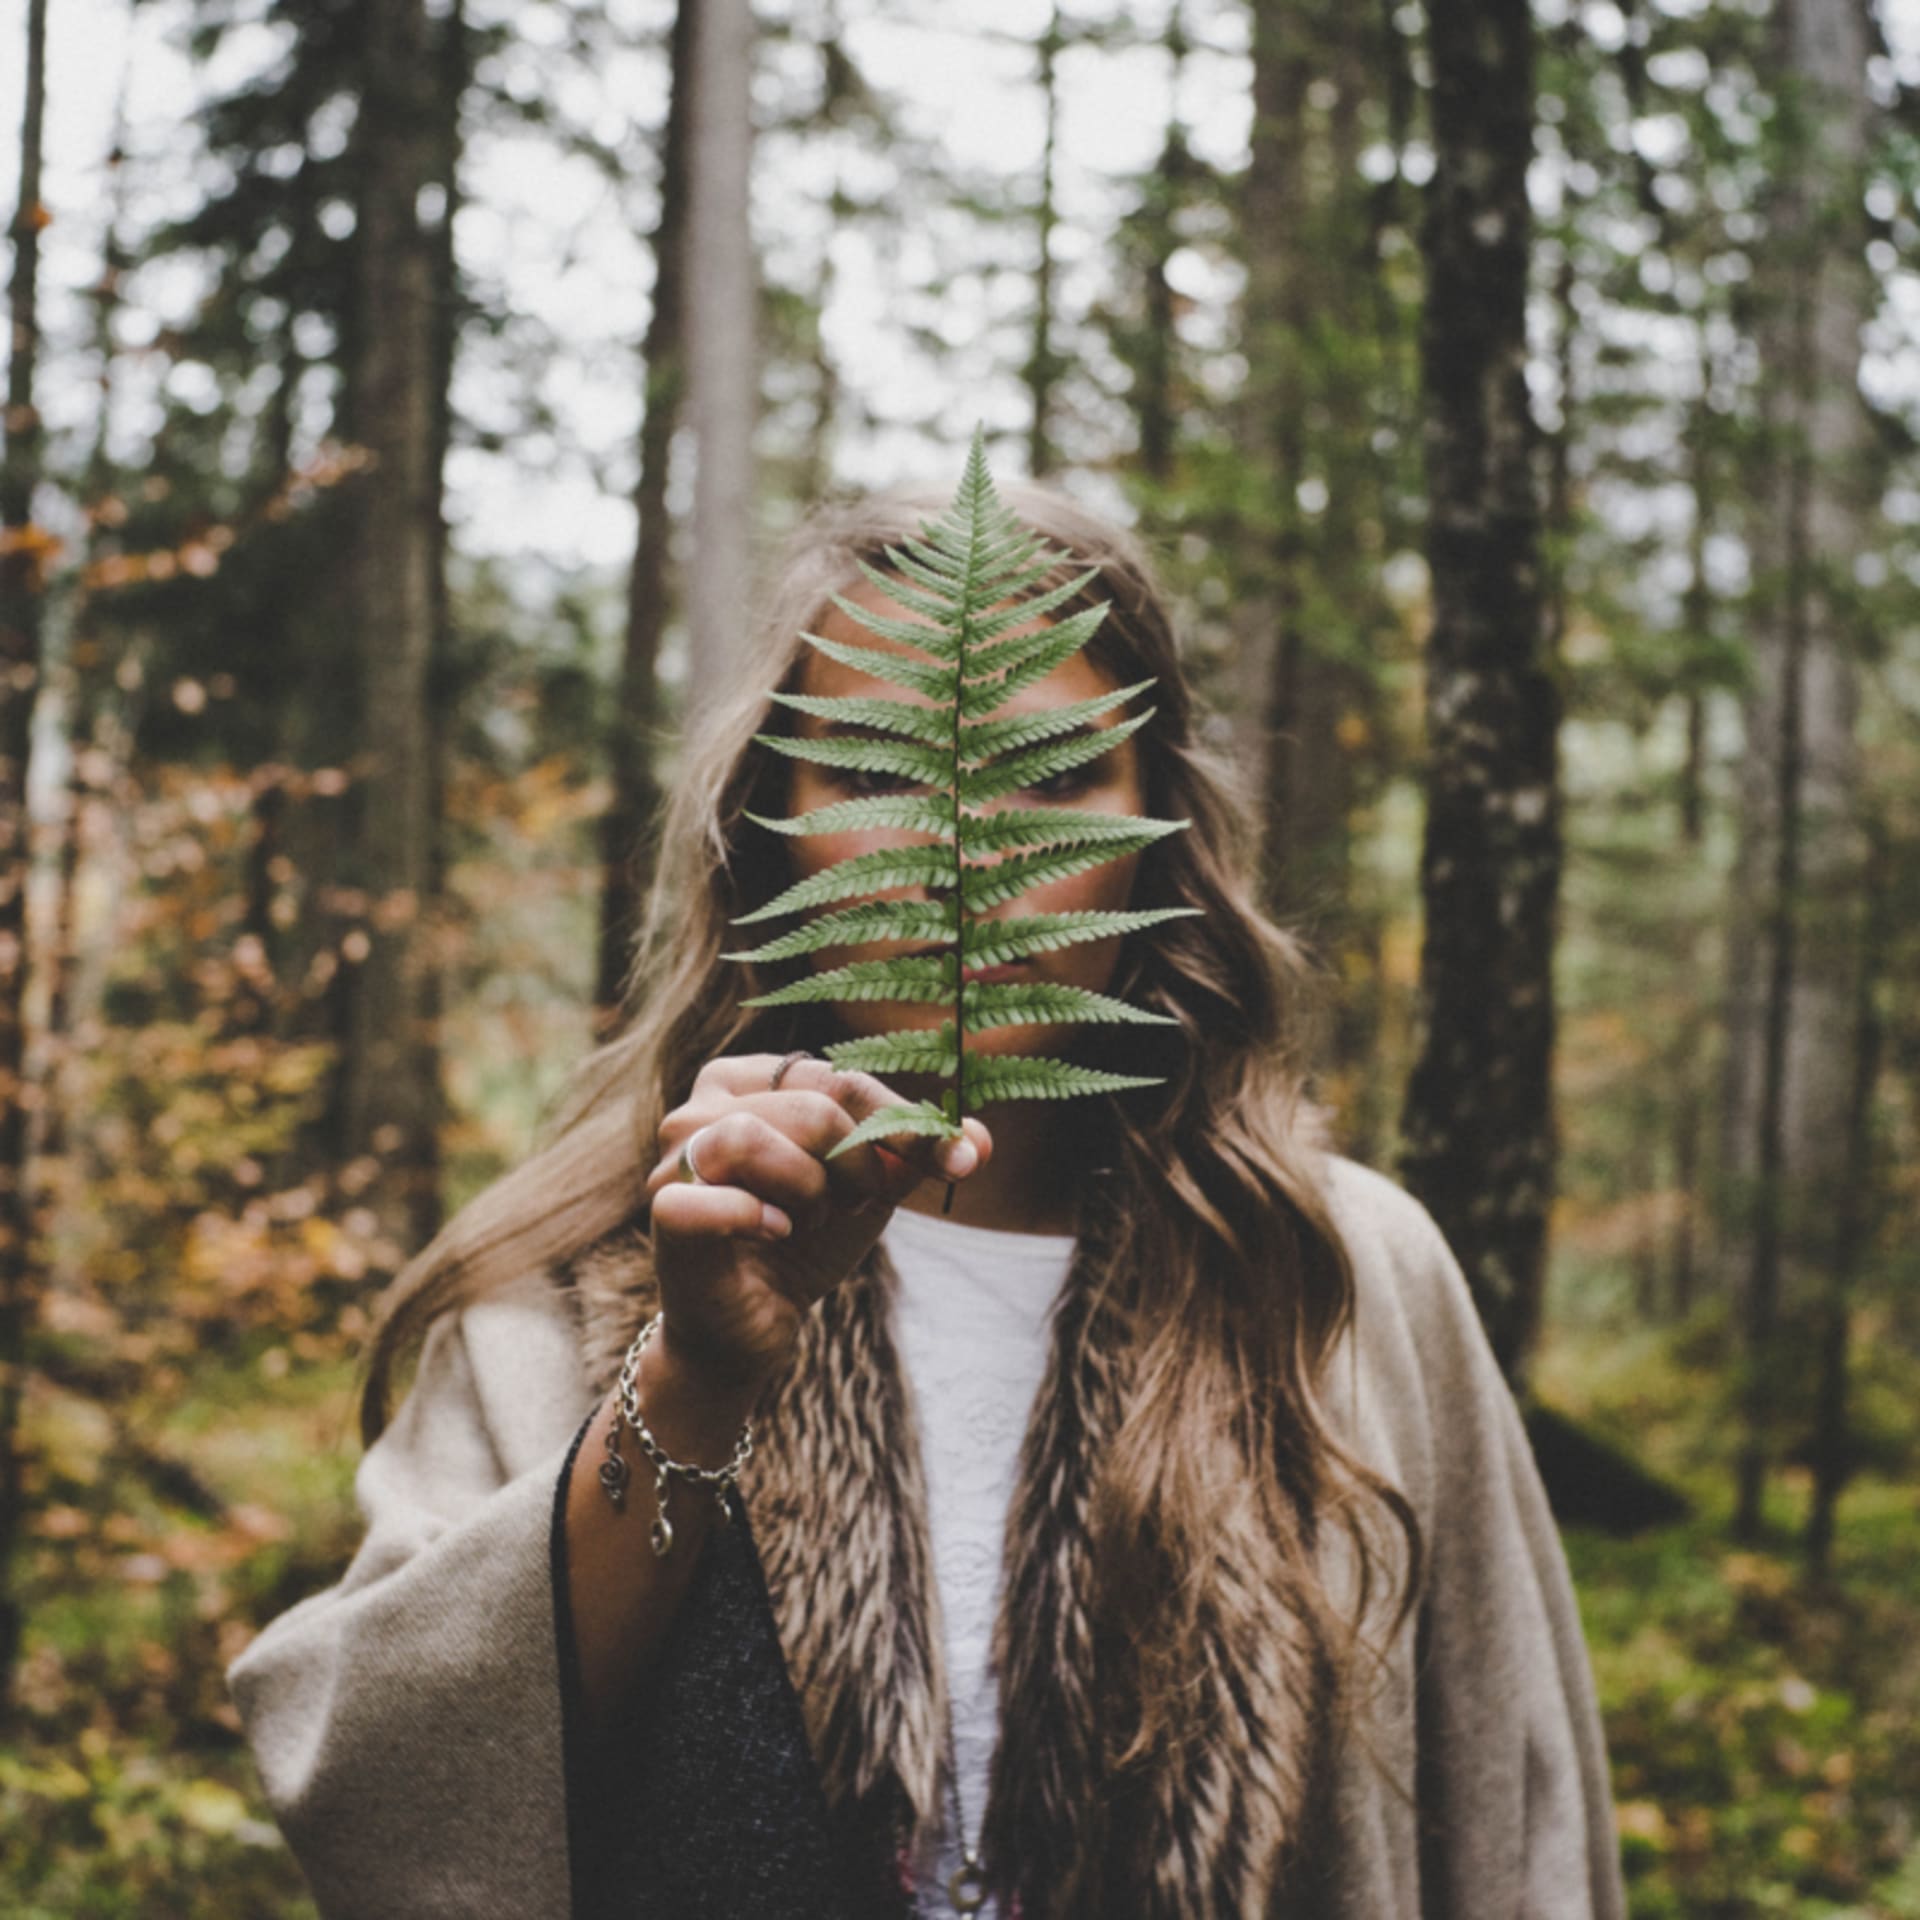 Girl holdind a plant in Finnish forrest.